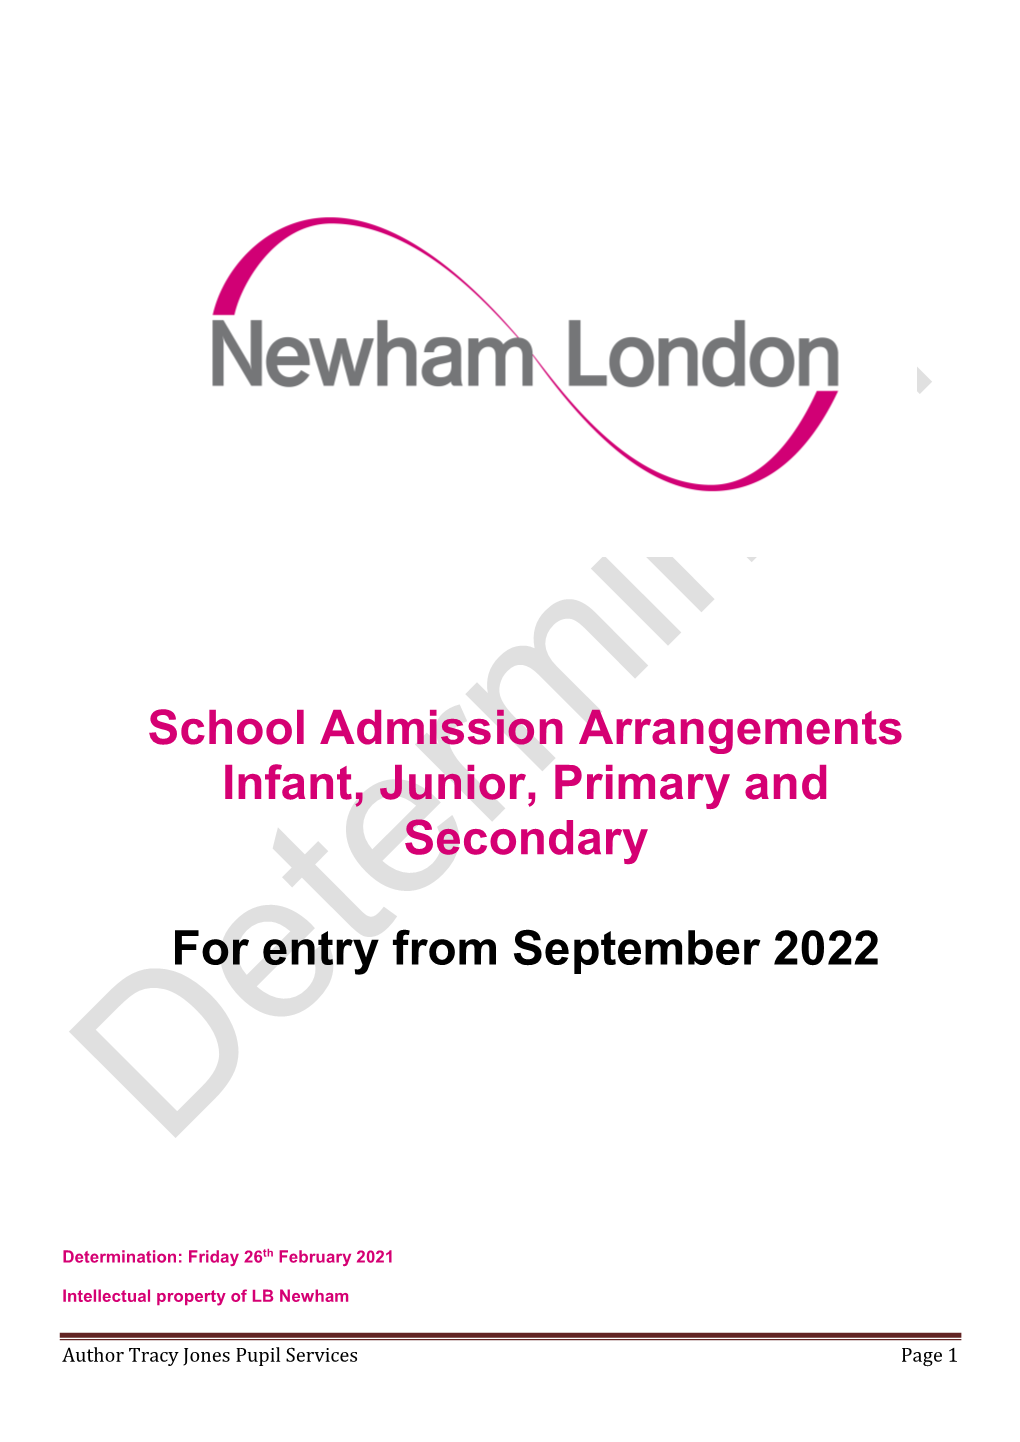 School Admission Arrangements Infant, Junior, Primary and Secondary